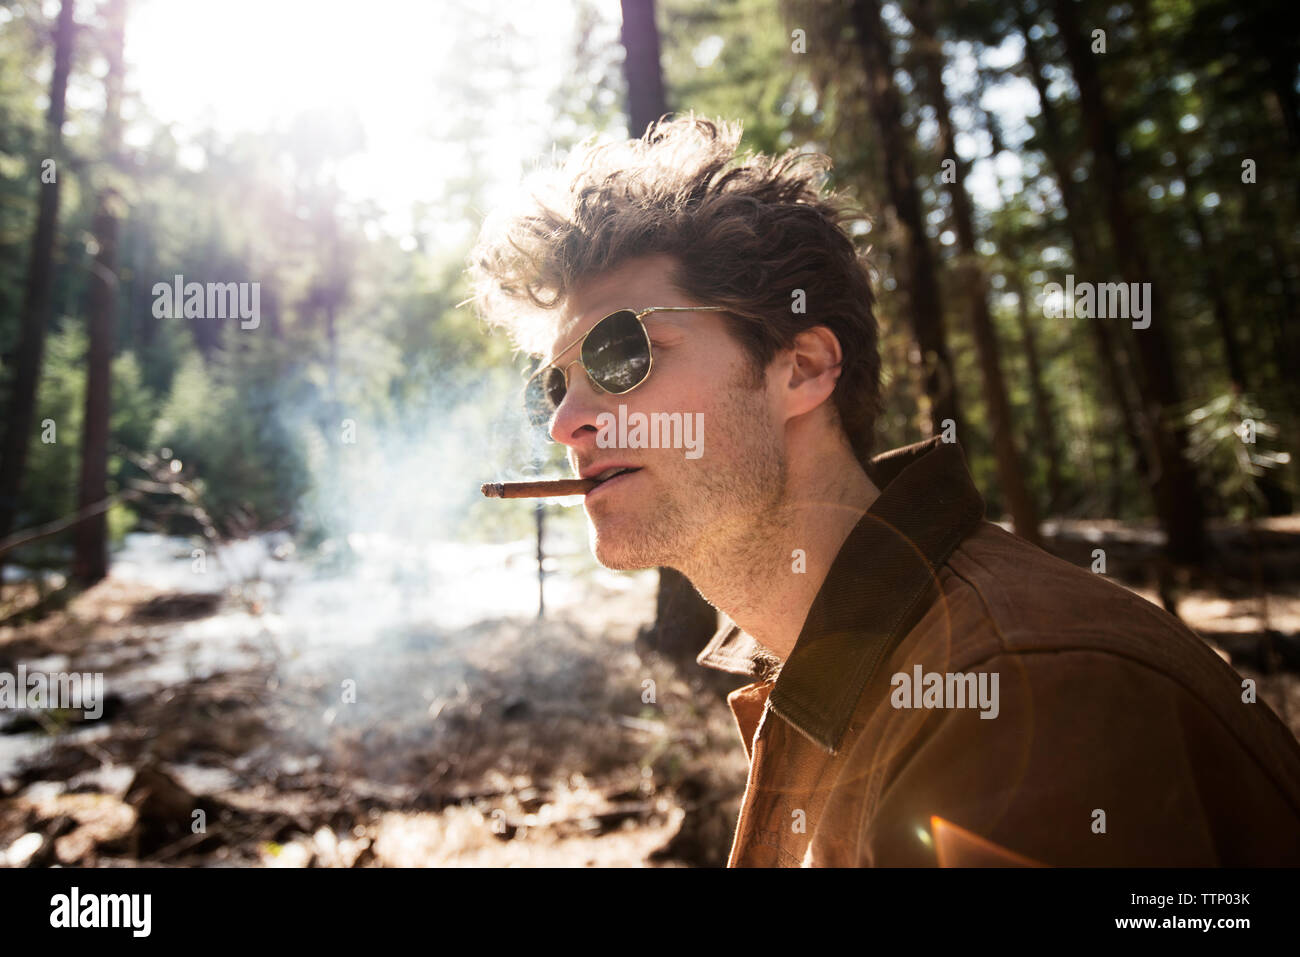 Side view of man smoking cigar in forest Stock Photo